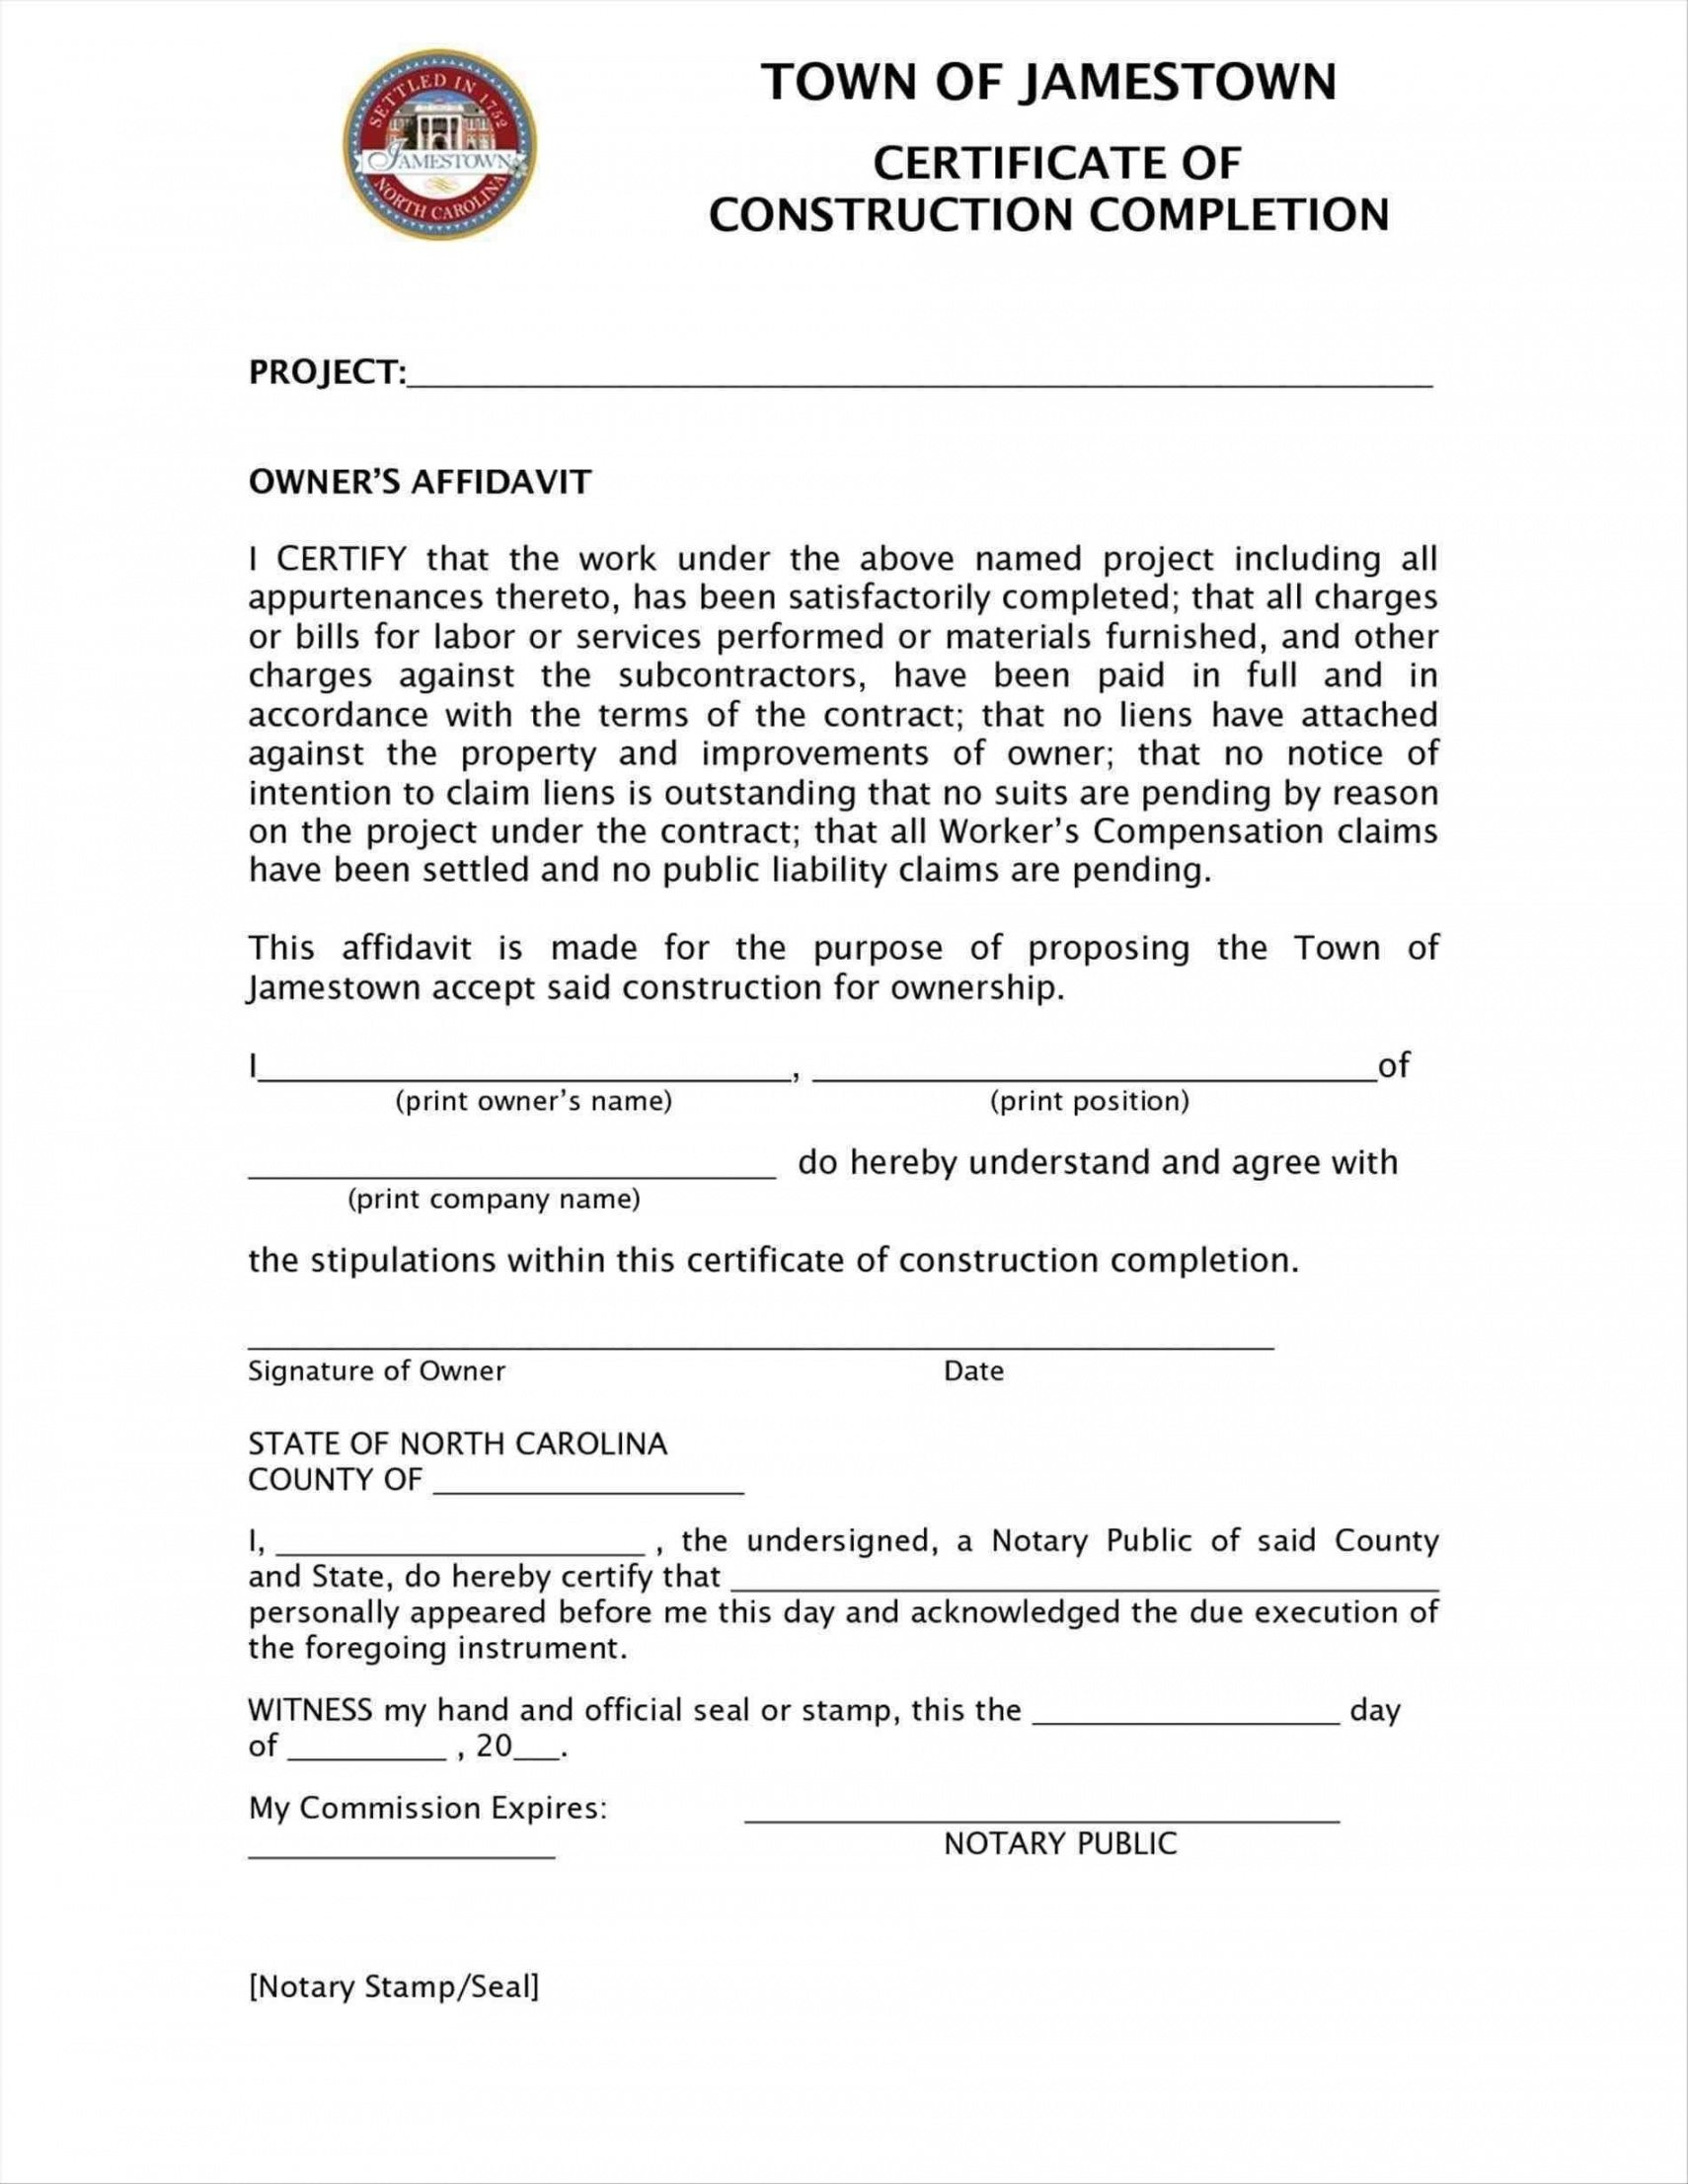 Free Completion Certificate Template Radiodignidad Intended For Certificate Of Completion Template Construction